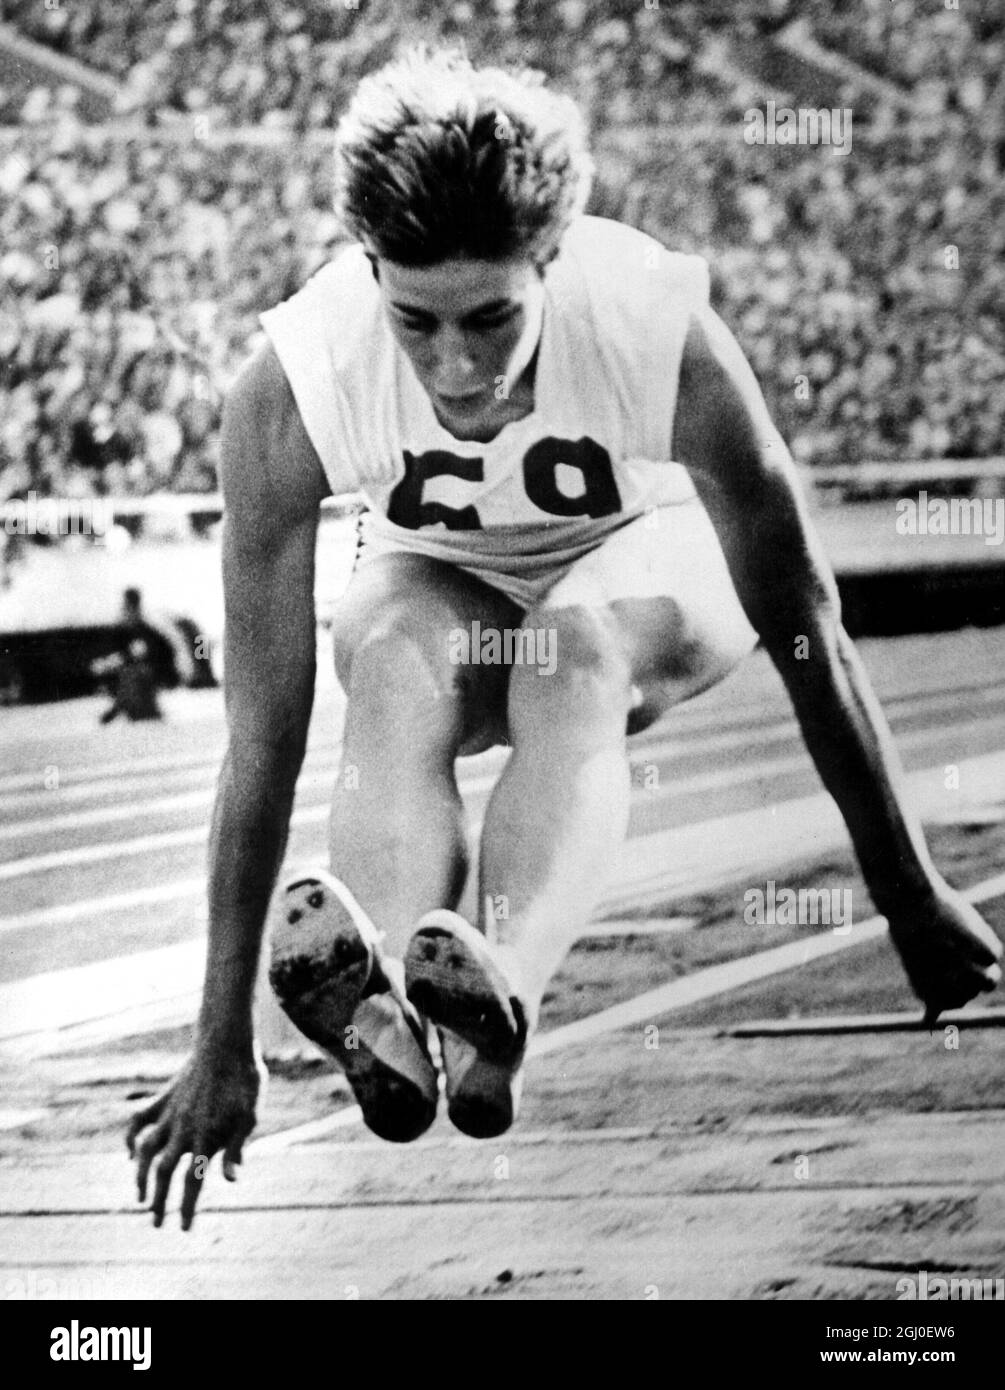 Olympic Games 1964 - Another Medal for Mary Rand Britain's Mary Rand, who won a gold medal earlier in the Games in the Long Jump event, in action when competing in the Long Jump section of the women's Pentathlon. Mary finished second in the final placings, being beaten by Russia's Irina Press. Stock Photo